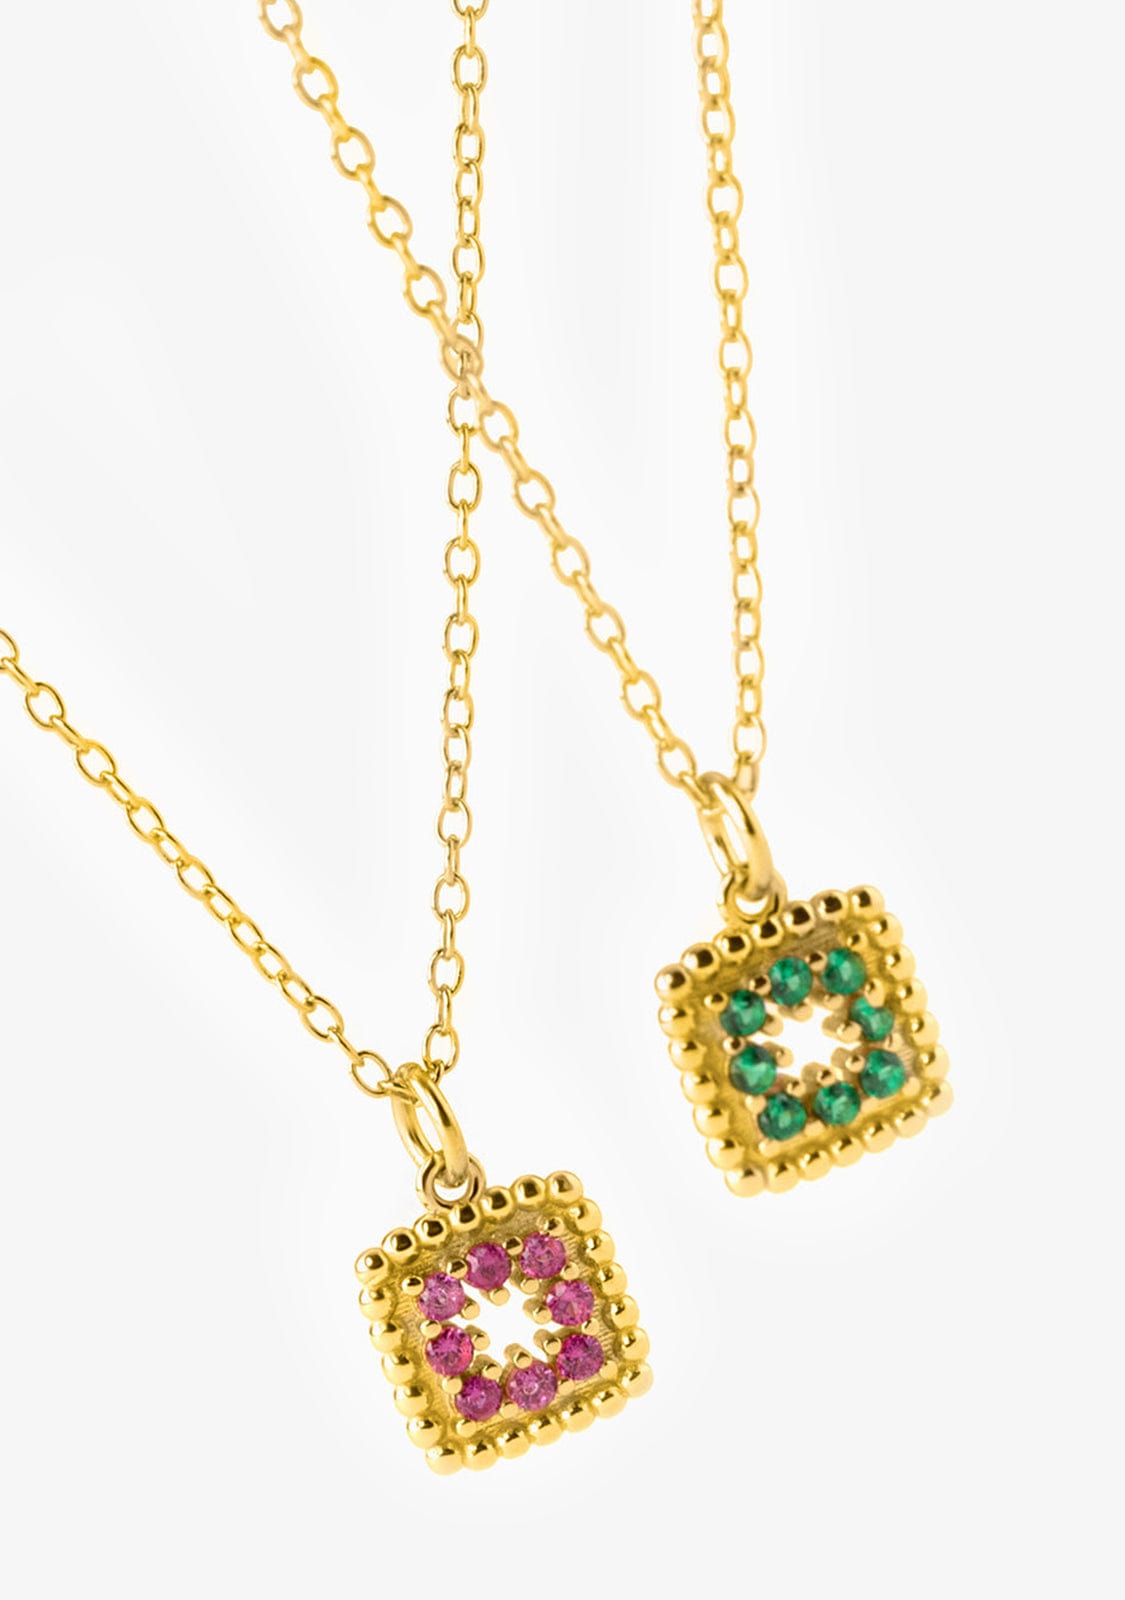 Necklace Cubo Emerald Gold